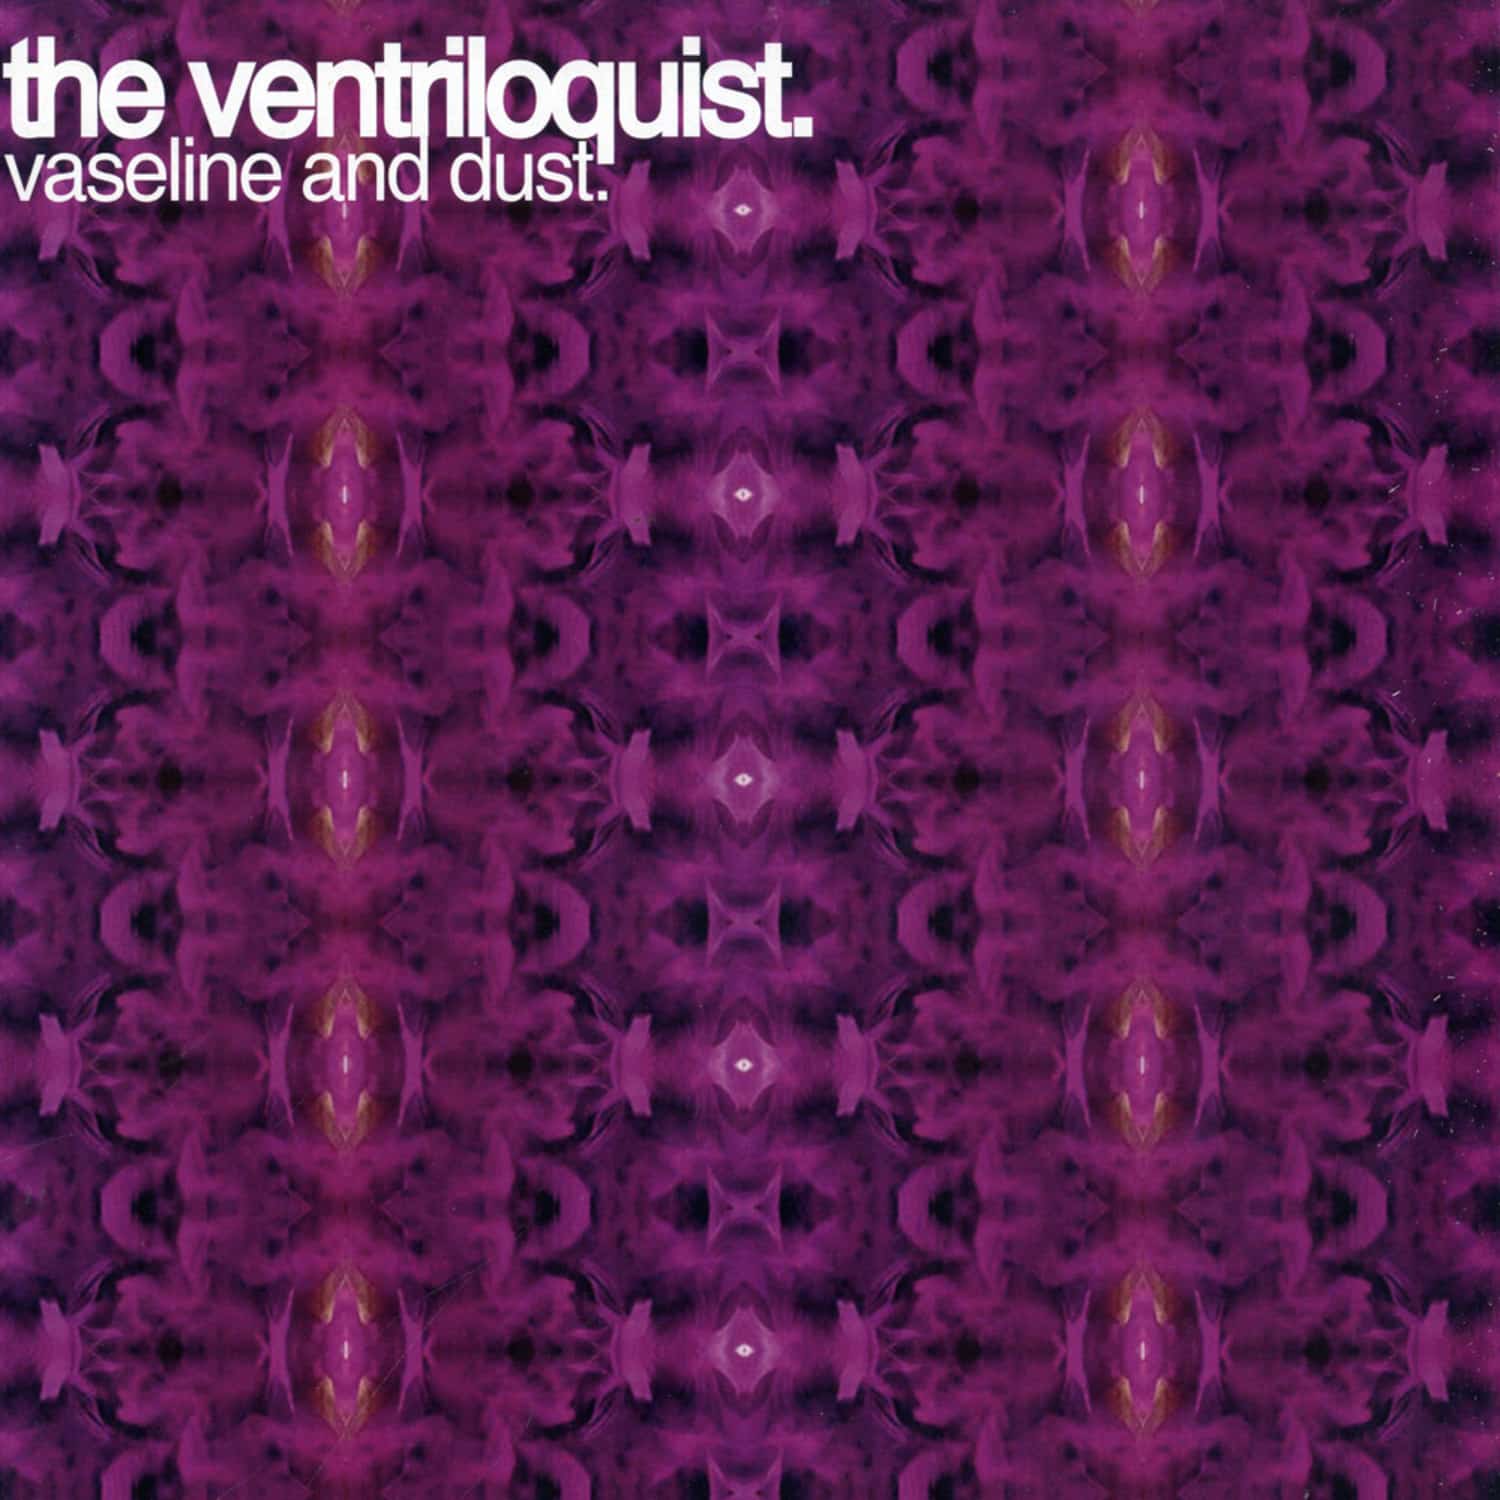 The Ventriloquist - VASELINE AND DUST